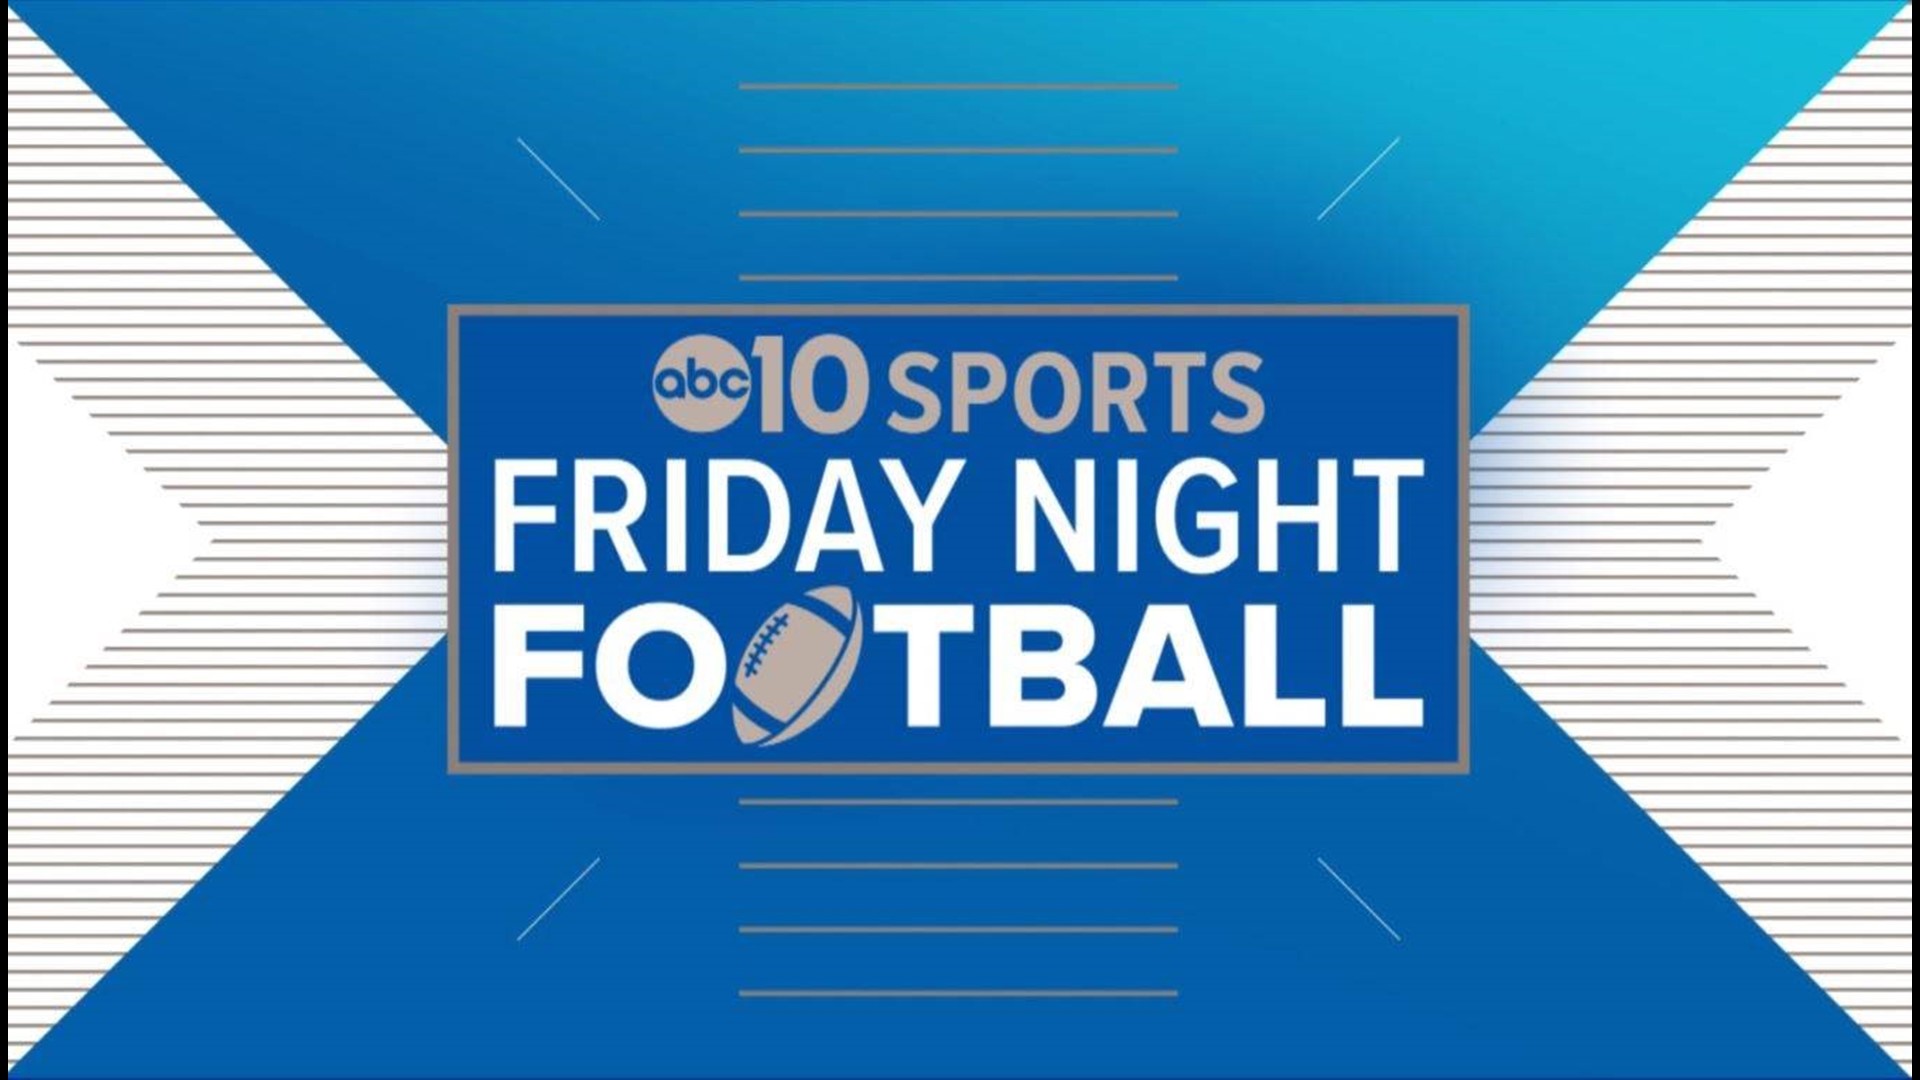 ABC10's Lina Washington and Kevin John break down the action from Week 7 of the high school football season in Northern California.